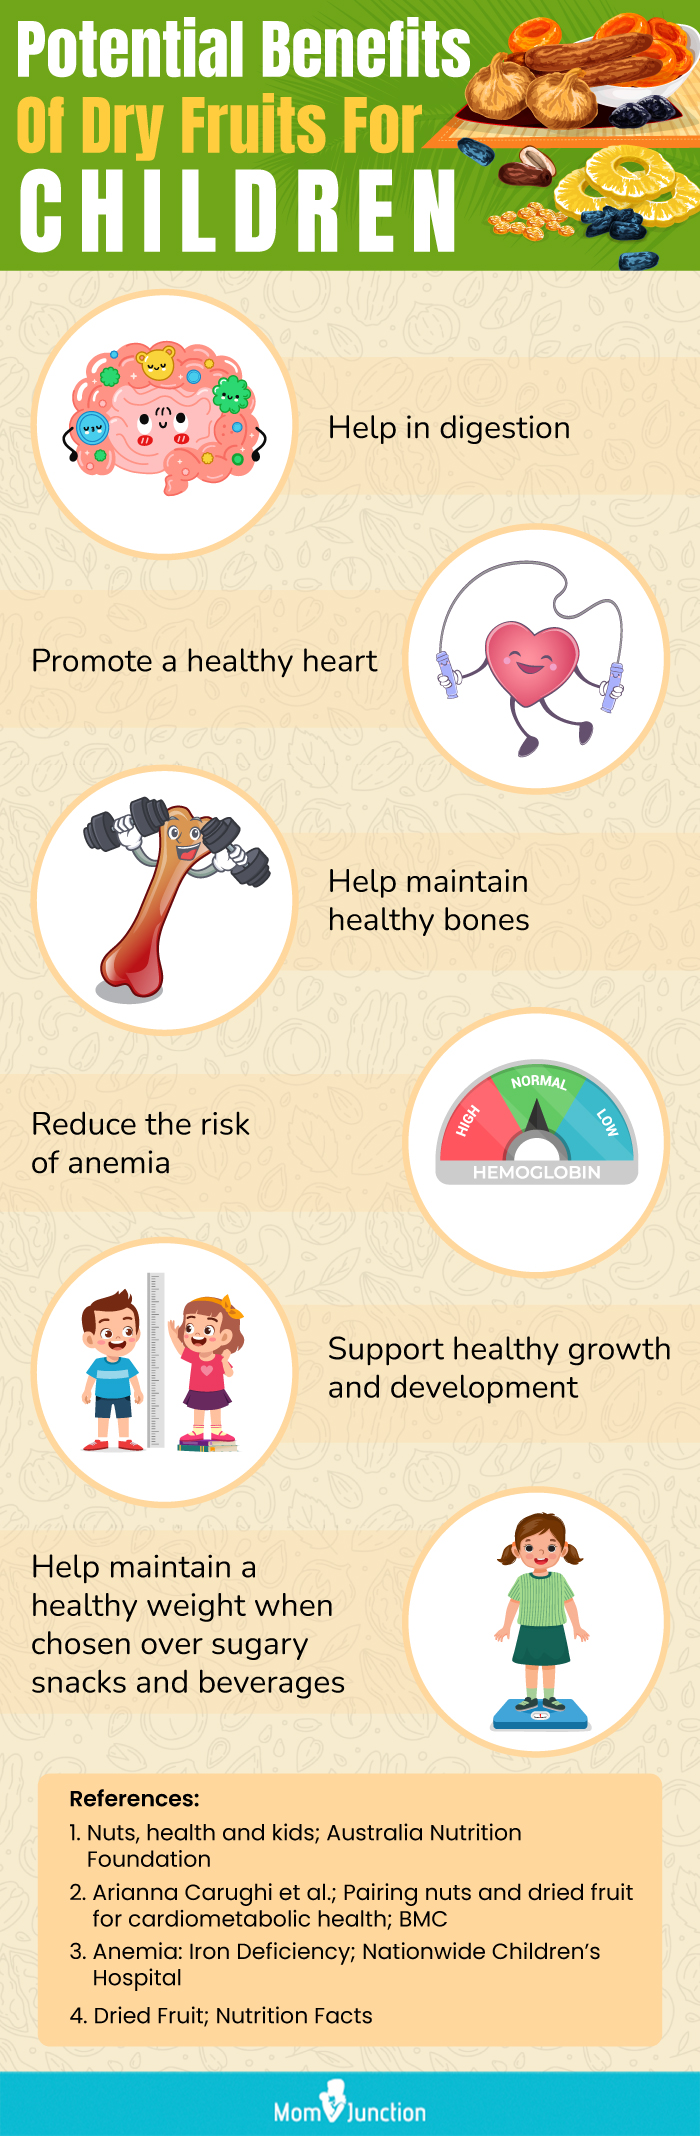 potential benefits of dry fruits for children (infographic)